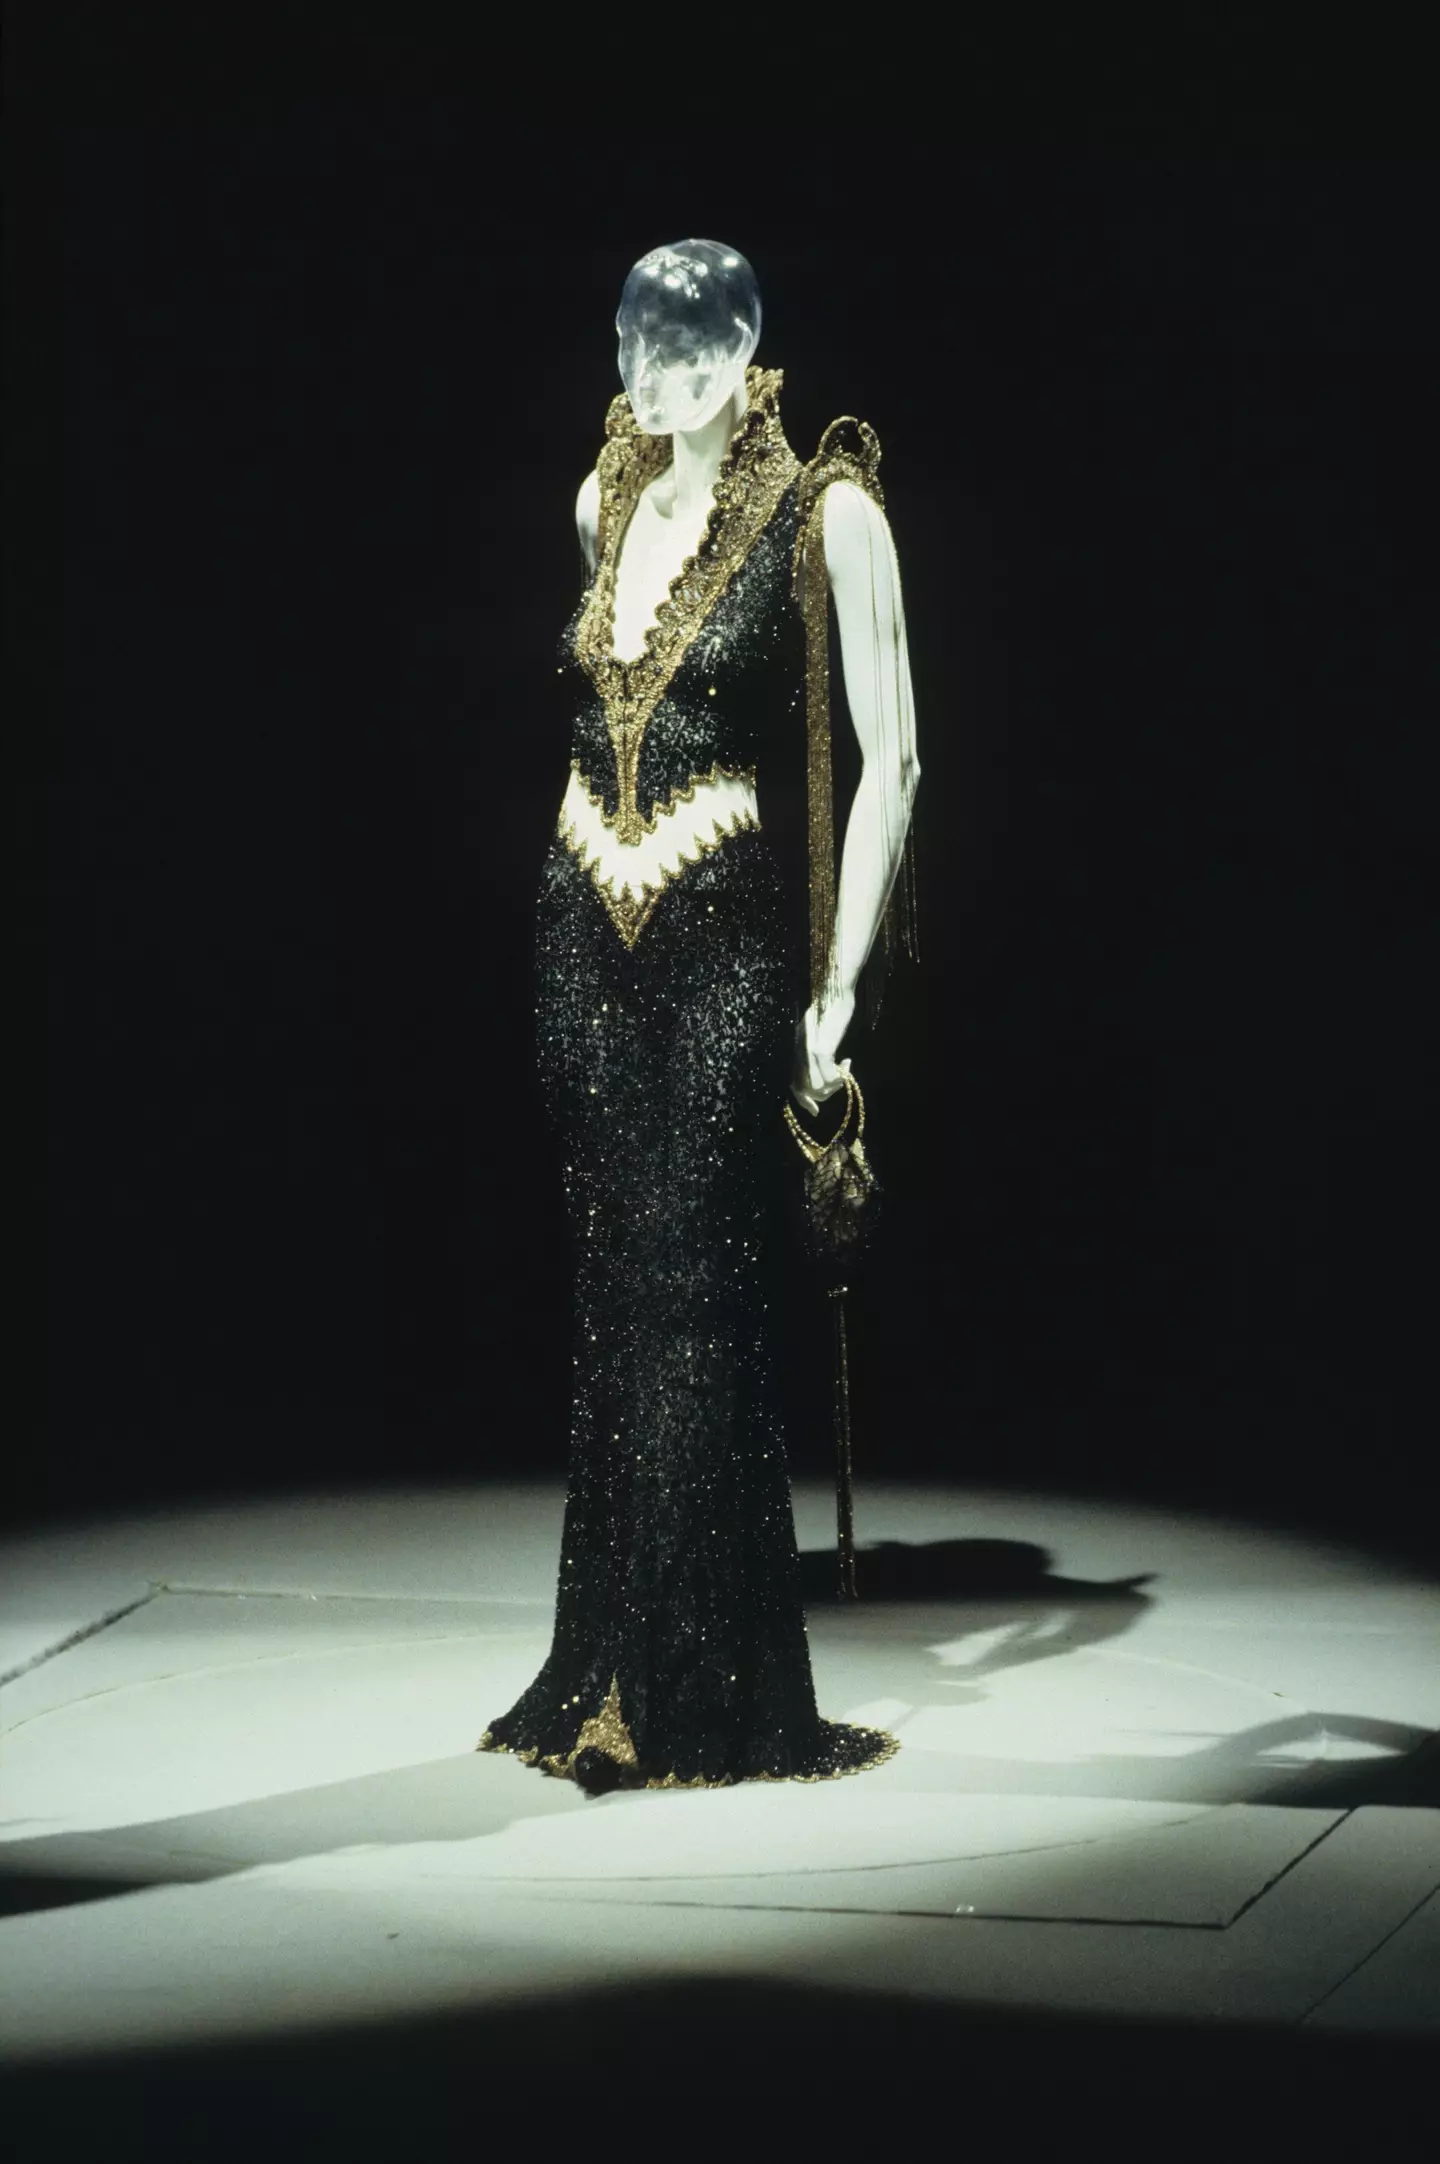 The Alexander McQueen dress made its debut in 1999. (Giovanni Giannoni/WWD/Penske Media via Getty Images)